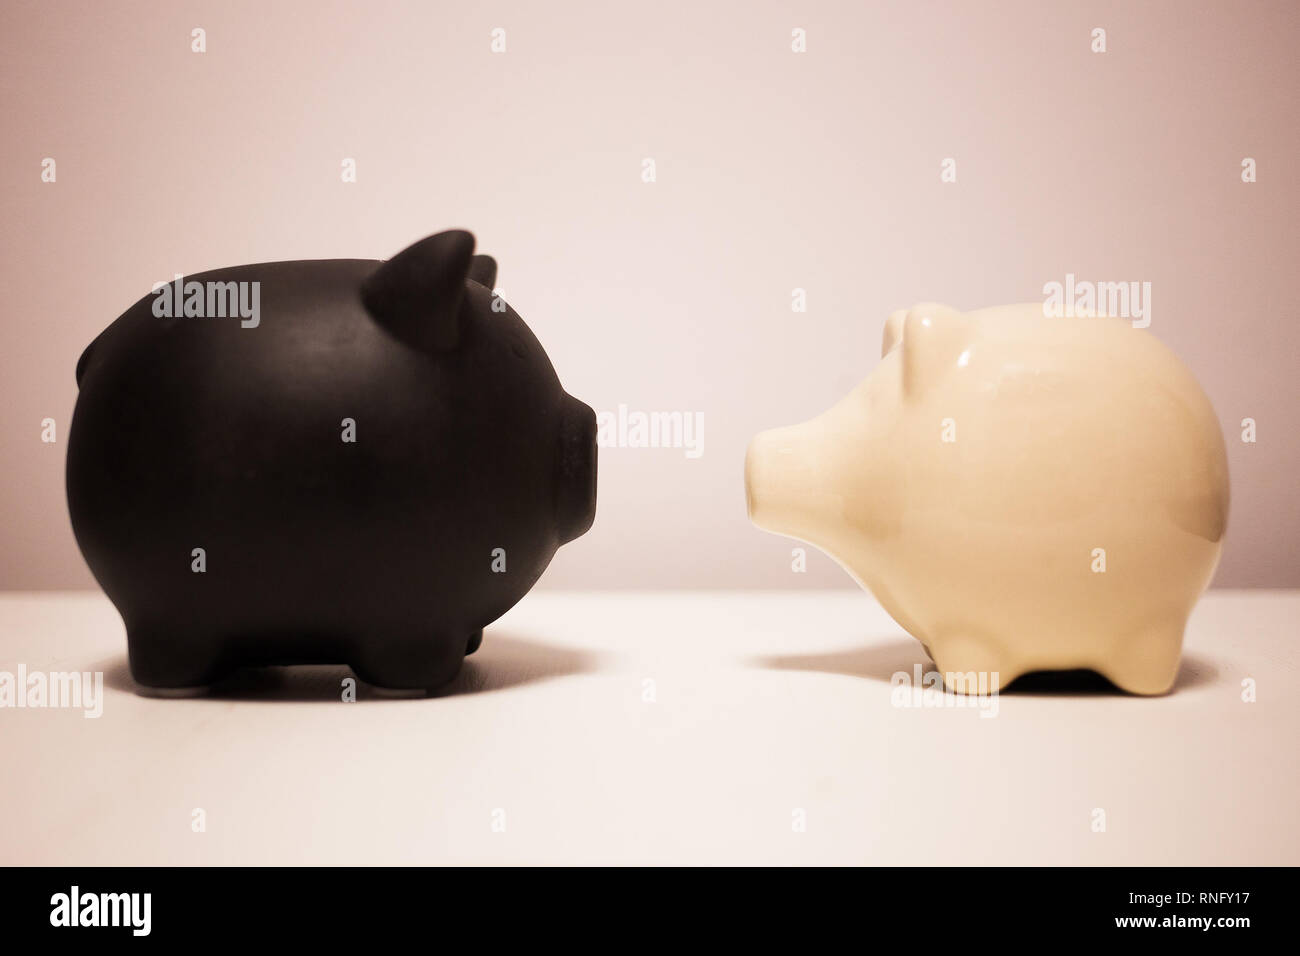 Black and white piggy bank on the plain background, concept of debt and savings Stock Photo